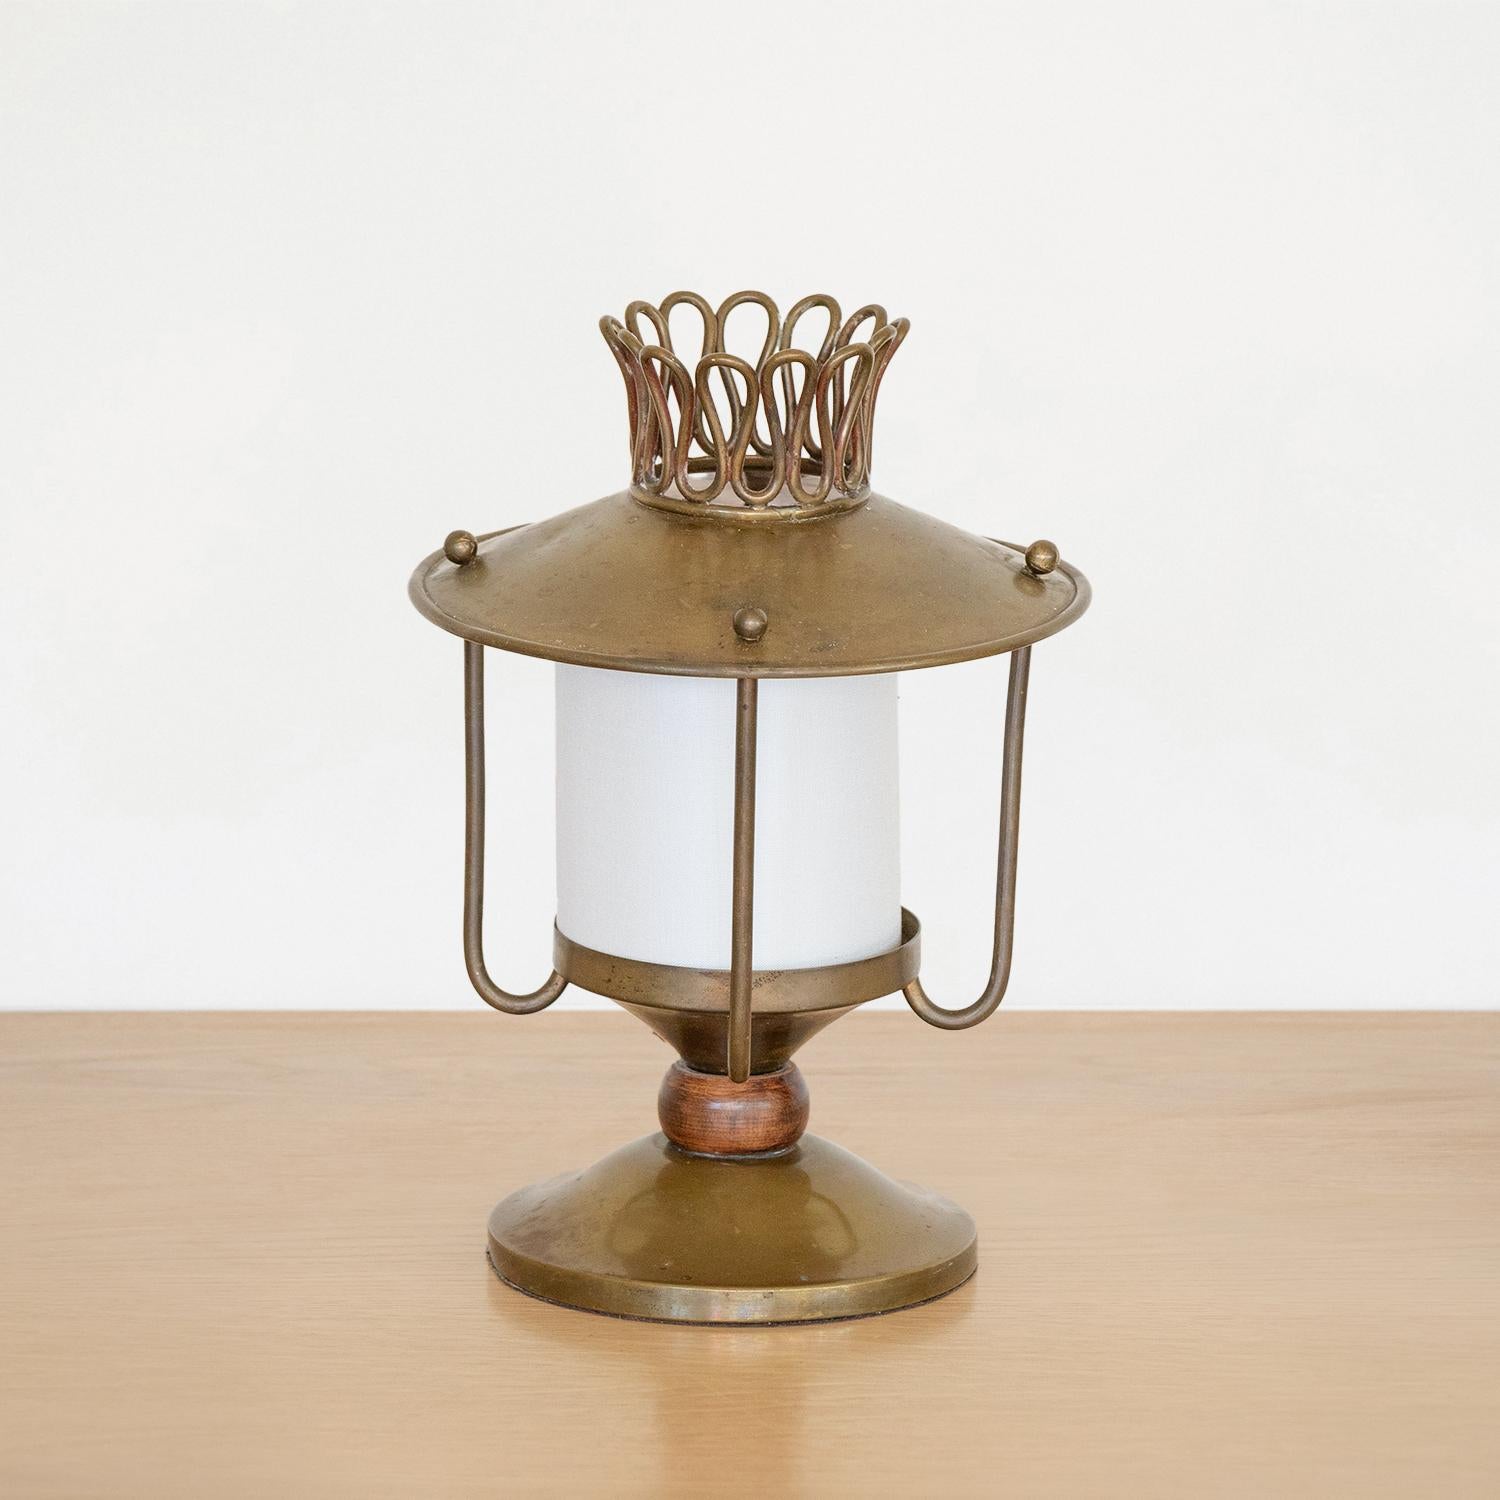 Beautiful petite brass table lamp from Italy, 1940's.  Unique brass lantern shape with brass squiggle detail on top. Circular base with wood ball on stem. Brass balls on top of lantern are removable in order to remove top and access bulb. Newly